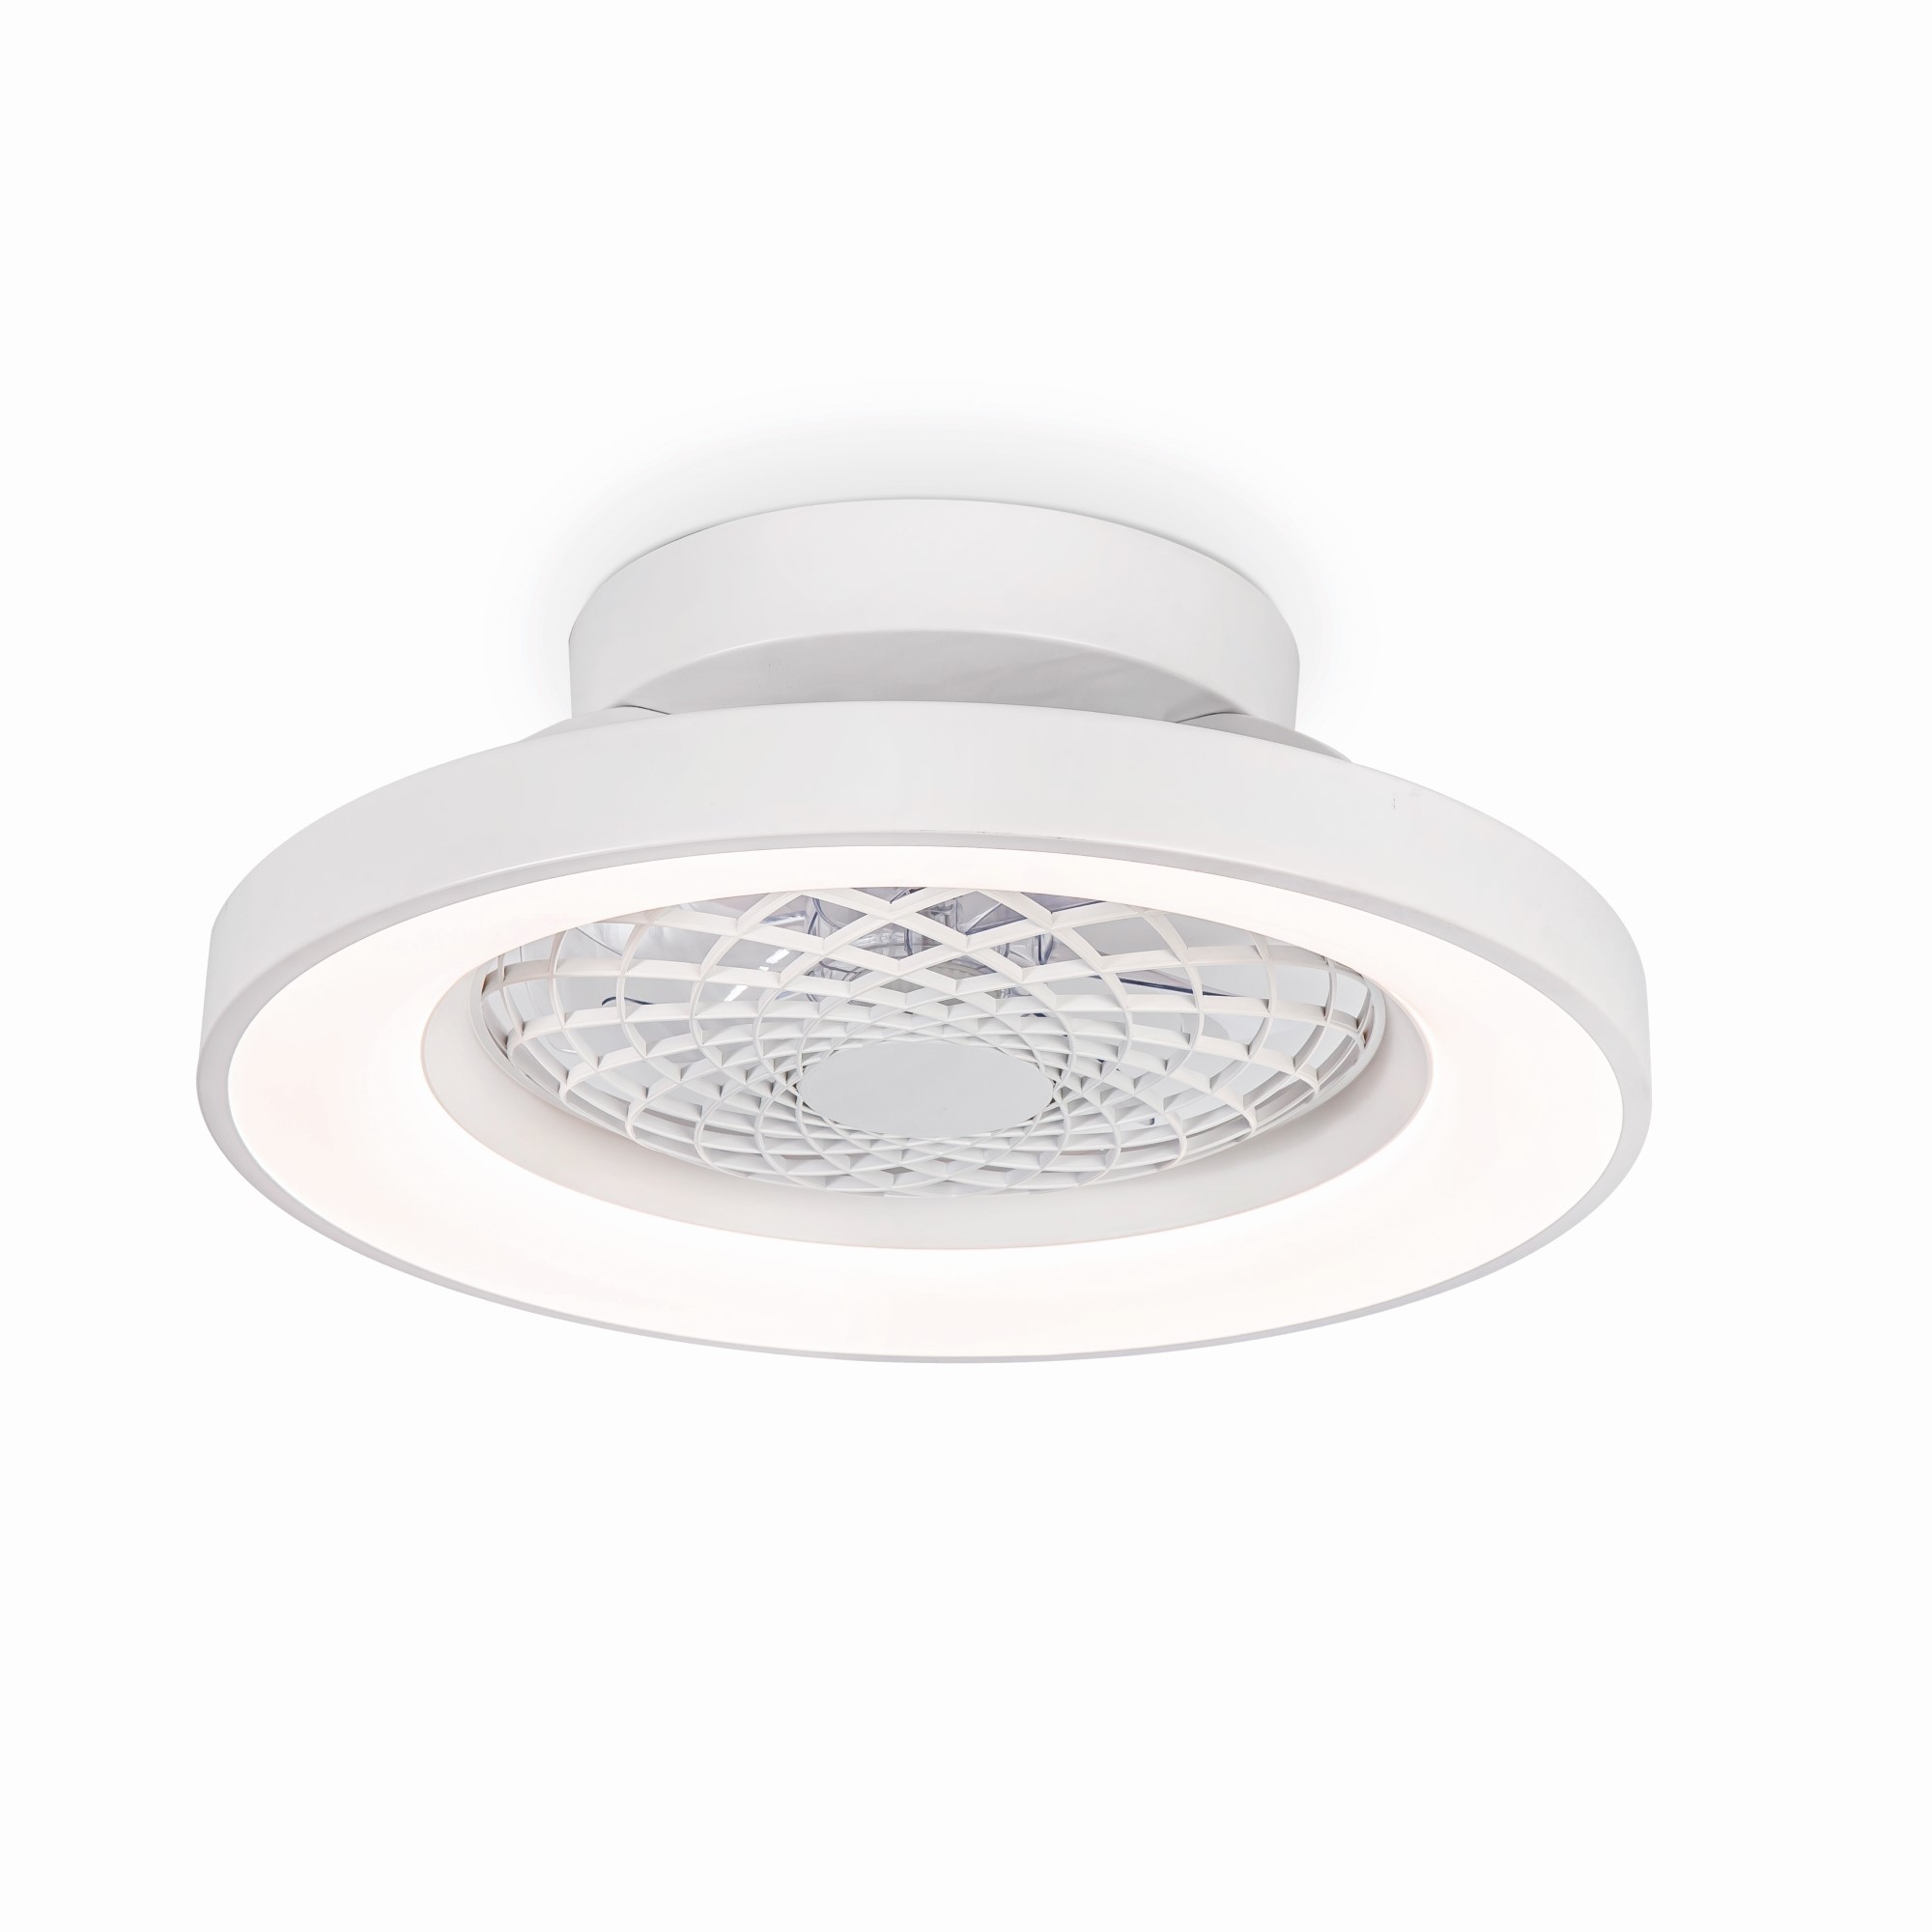 M7804  Tibet Mini 70W LED Dimmable Ceiling Light & Fan; Remote Controlled